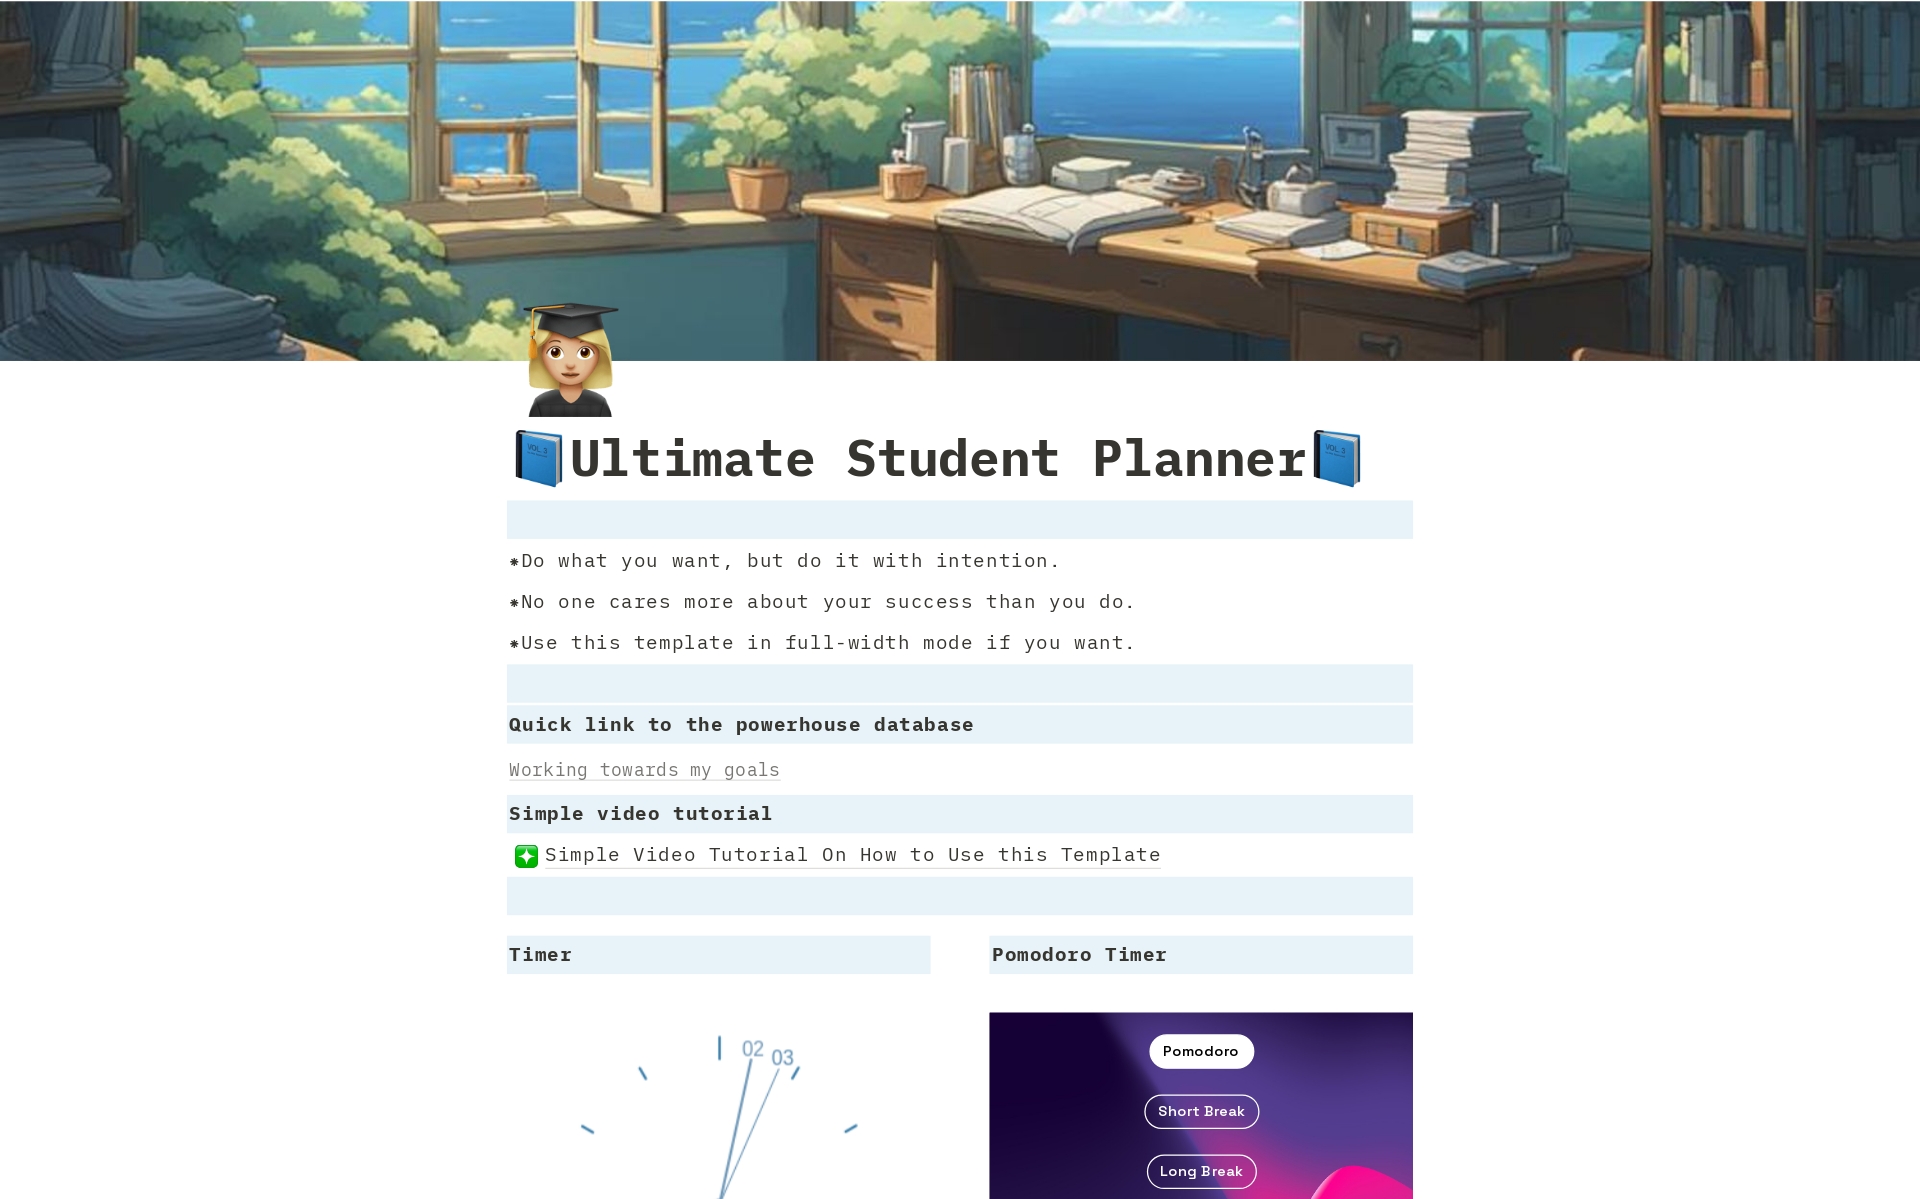 Do you get frustrated when your academic planning requires five different apps, but somehow you find your classes overlapping, and you had no clue that was happening in the first place?

My Ultimate Student Planner solves that problem for you.